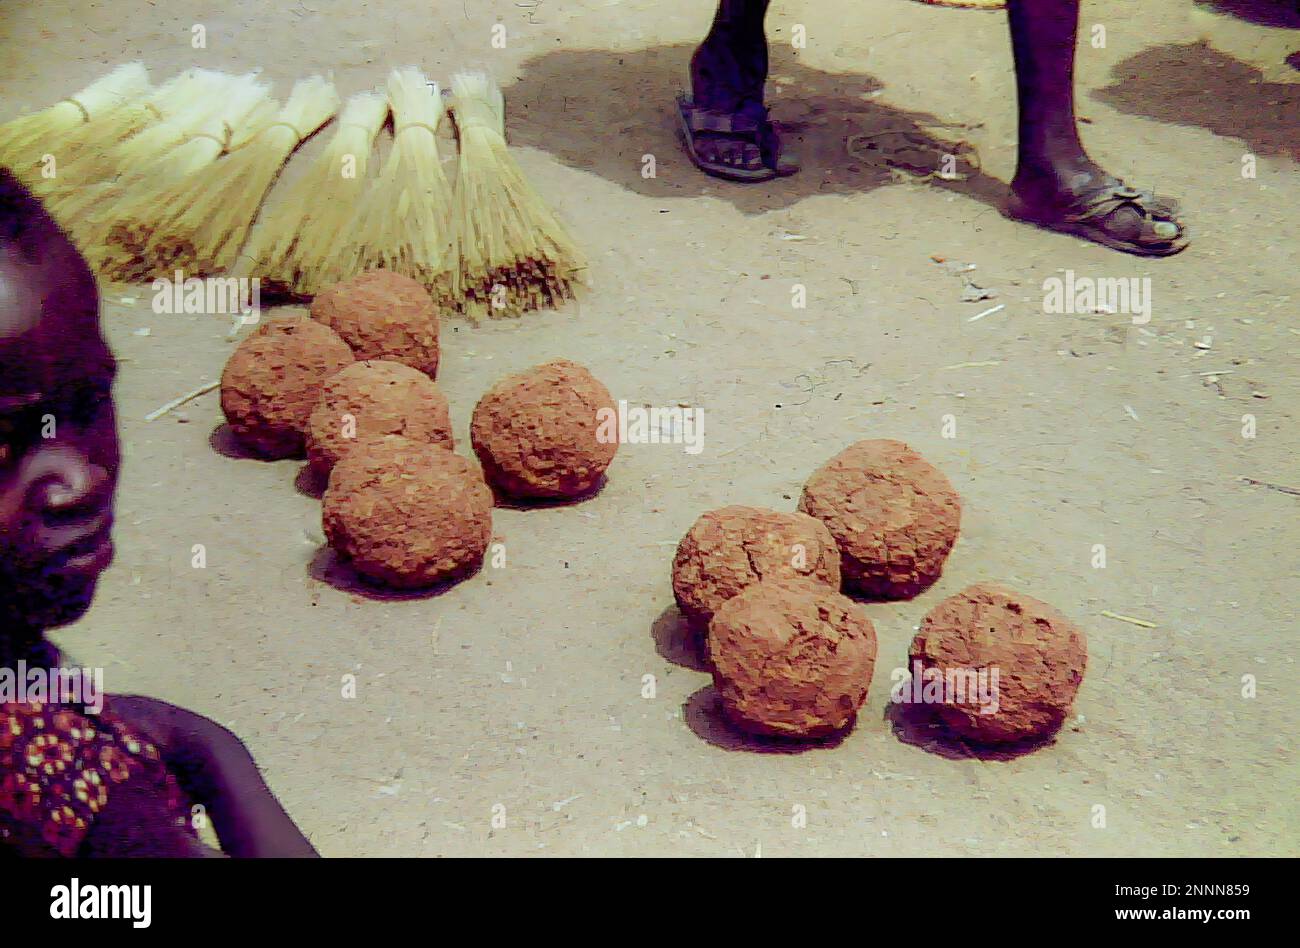 Balls of tobacco on sale at an outdoor market in Bolgatanga, Ghana c.1958 Stock Photo